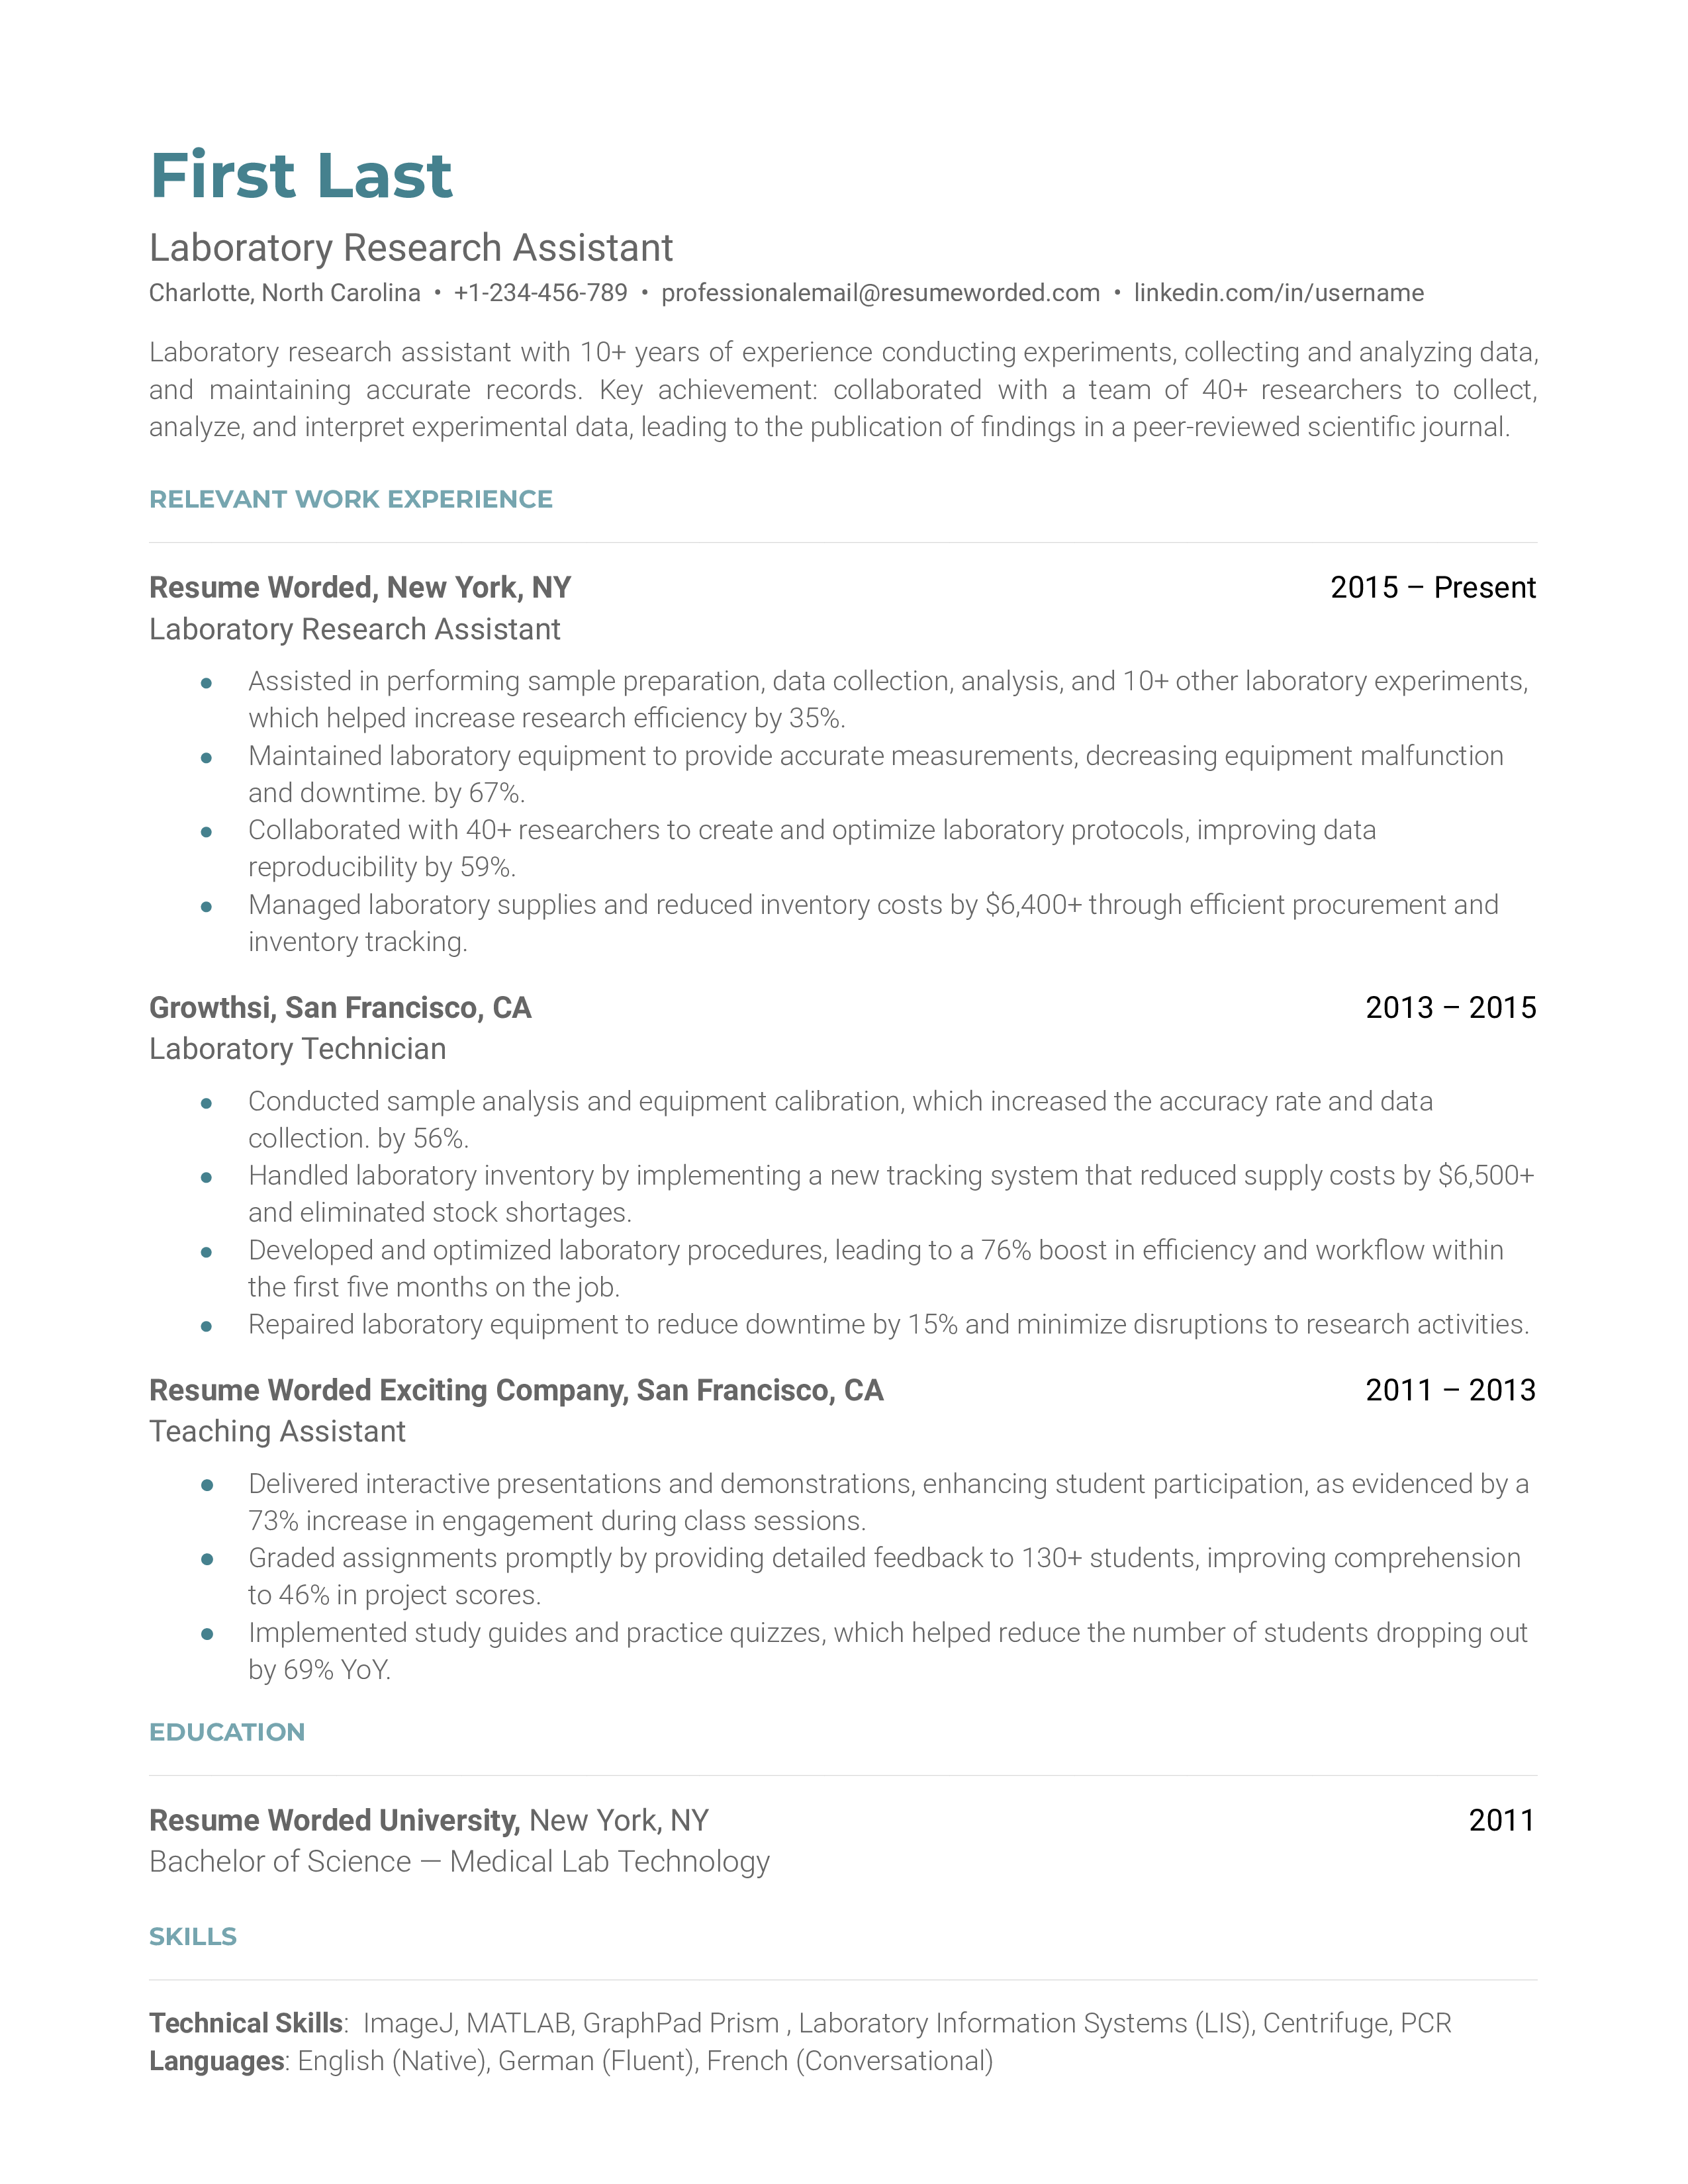 A CV for a Laboratory Research Assistant showcasing technical skills and experience.